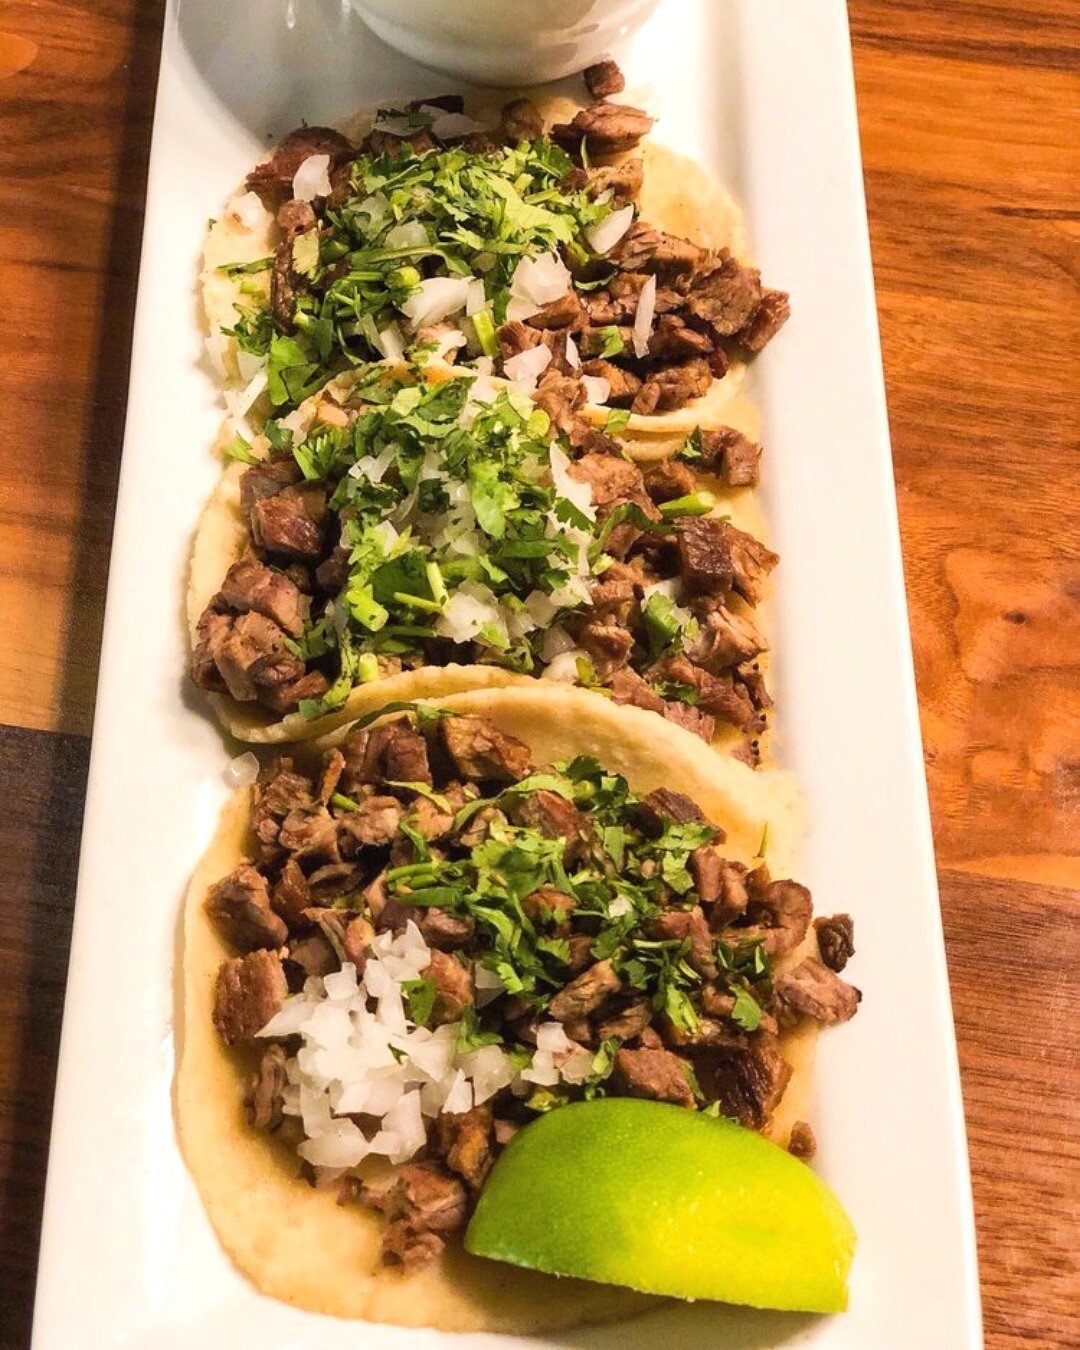 At El Mirasol, we take tacos seriously -- which is why we offer more than ten types of authentic street tacos, like succulent al pastor, juicy carnitas, and many more.

📸 Alex S via Yelp